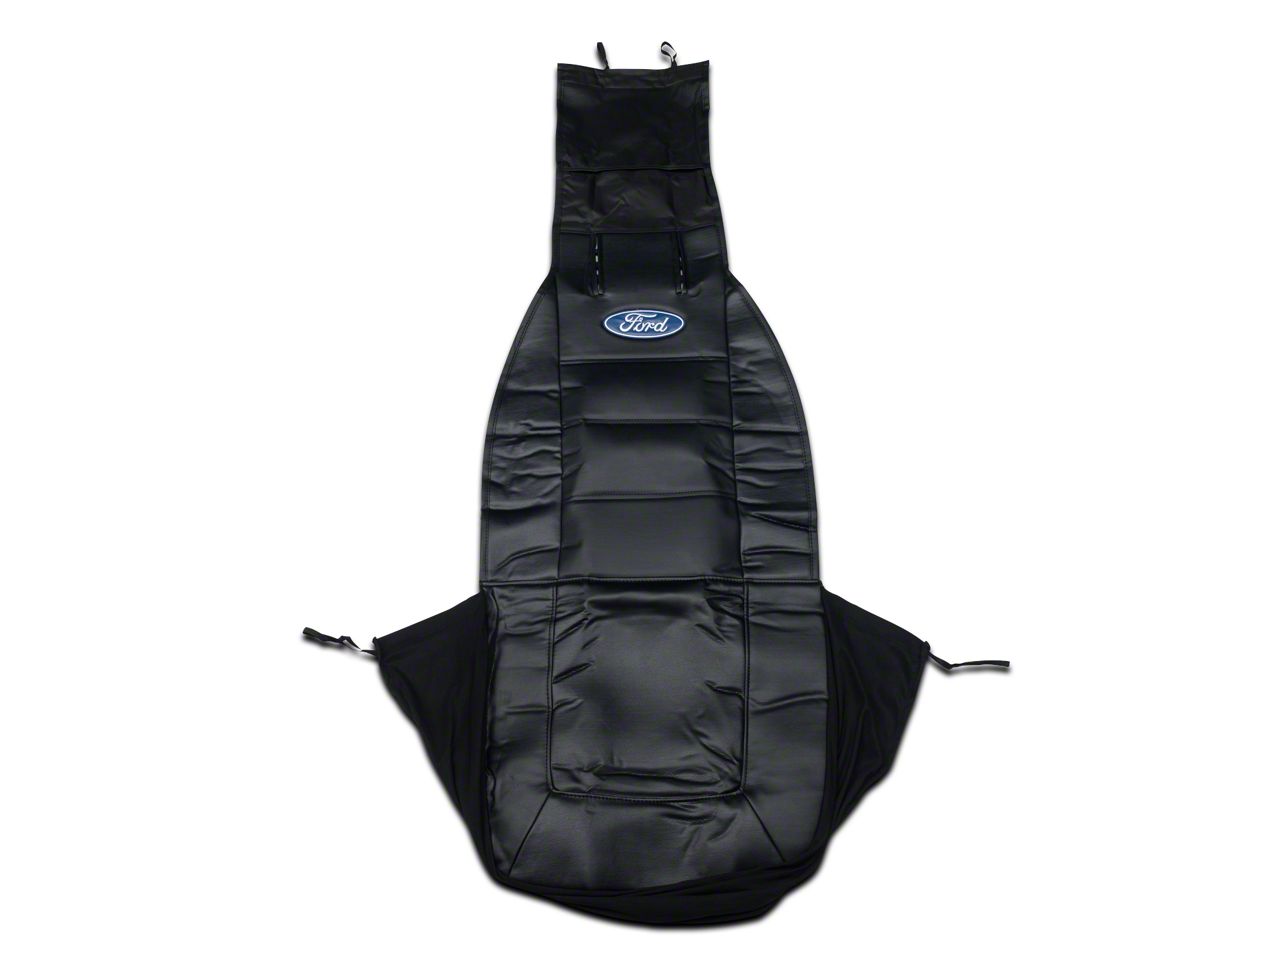 Ford emblem seat covers #2